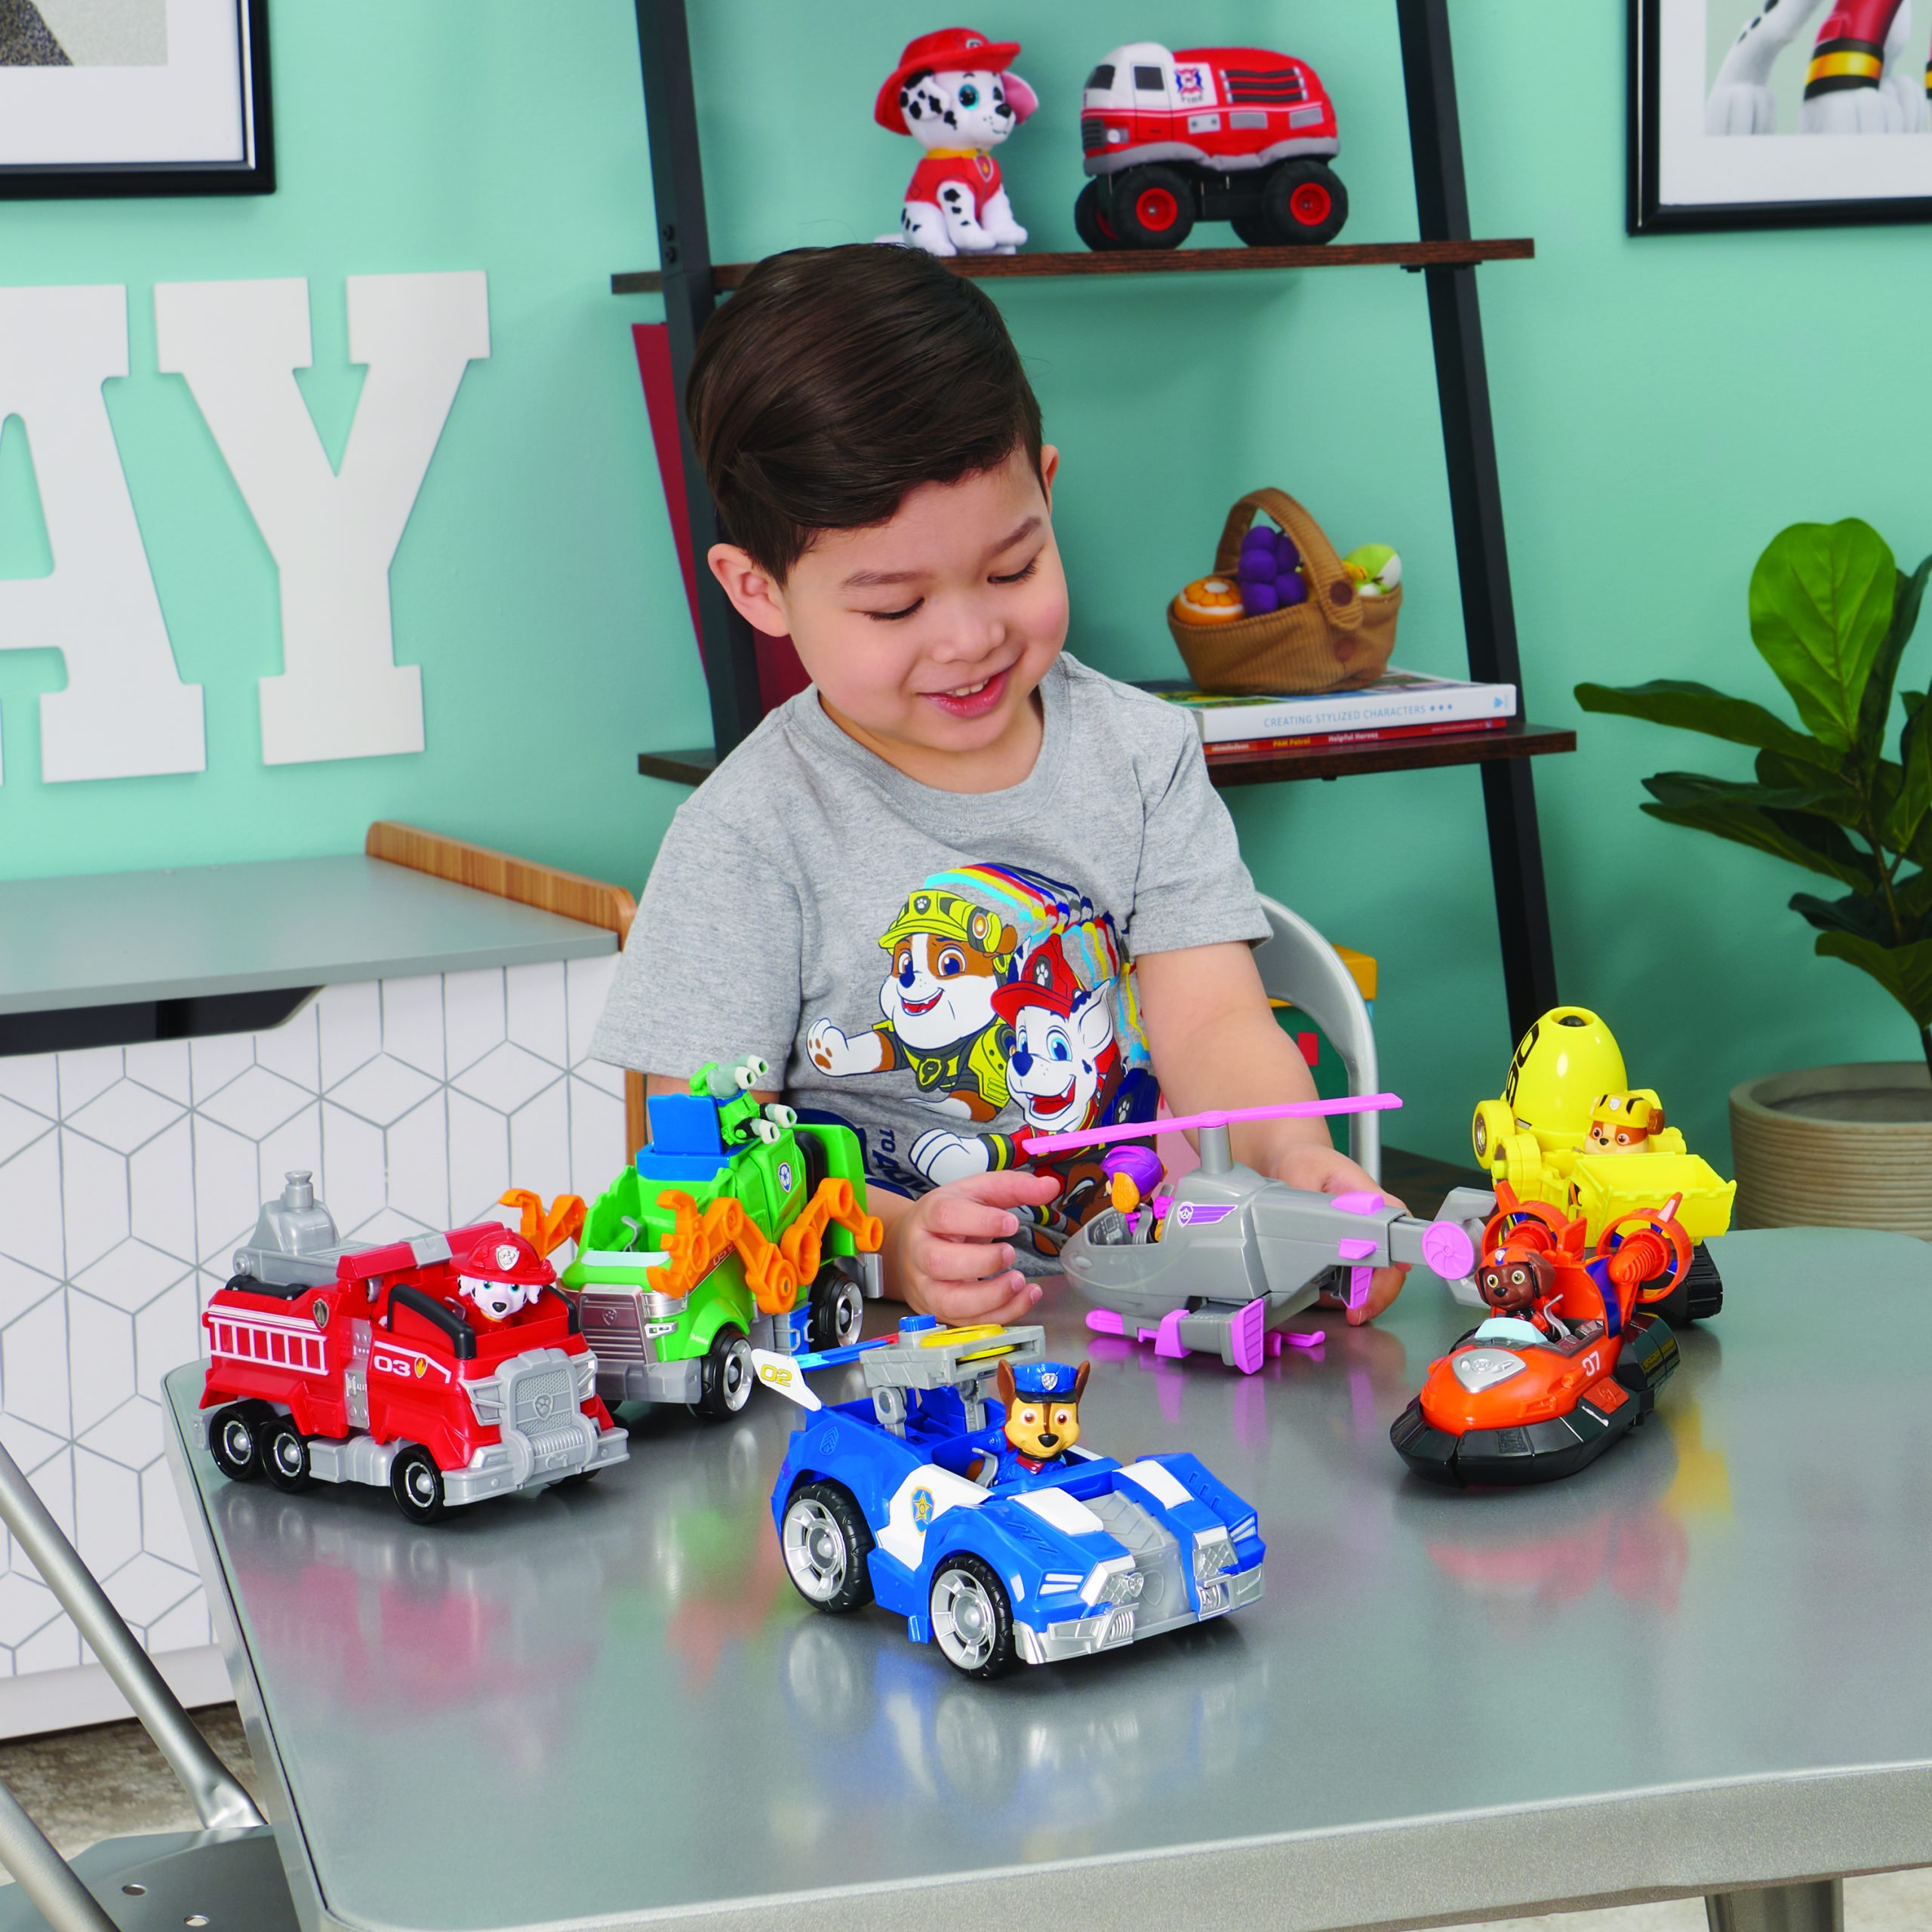 Spin Master Paw Patrol - The Movie - Zuma Deluxe Vehicle